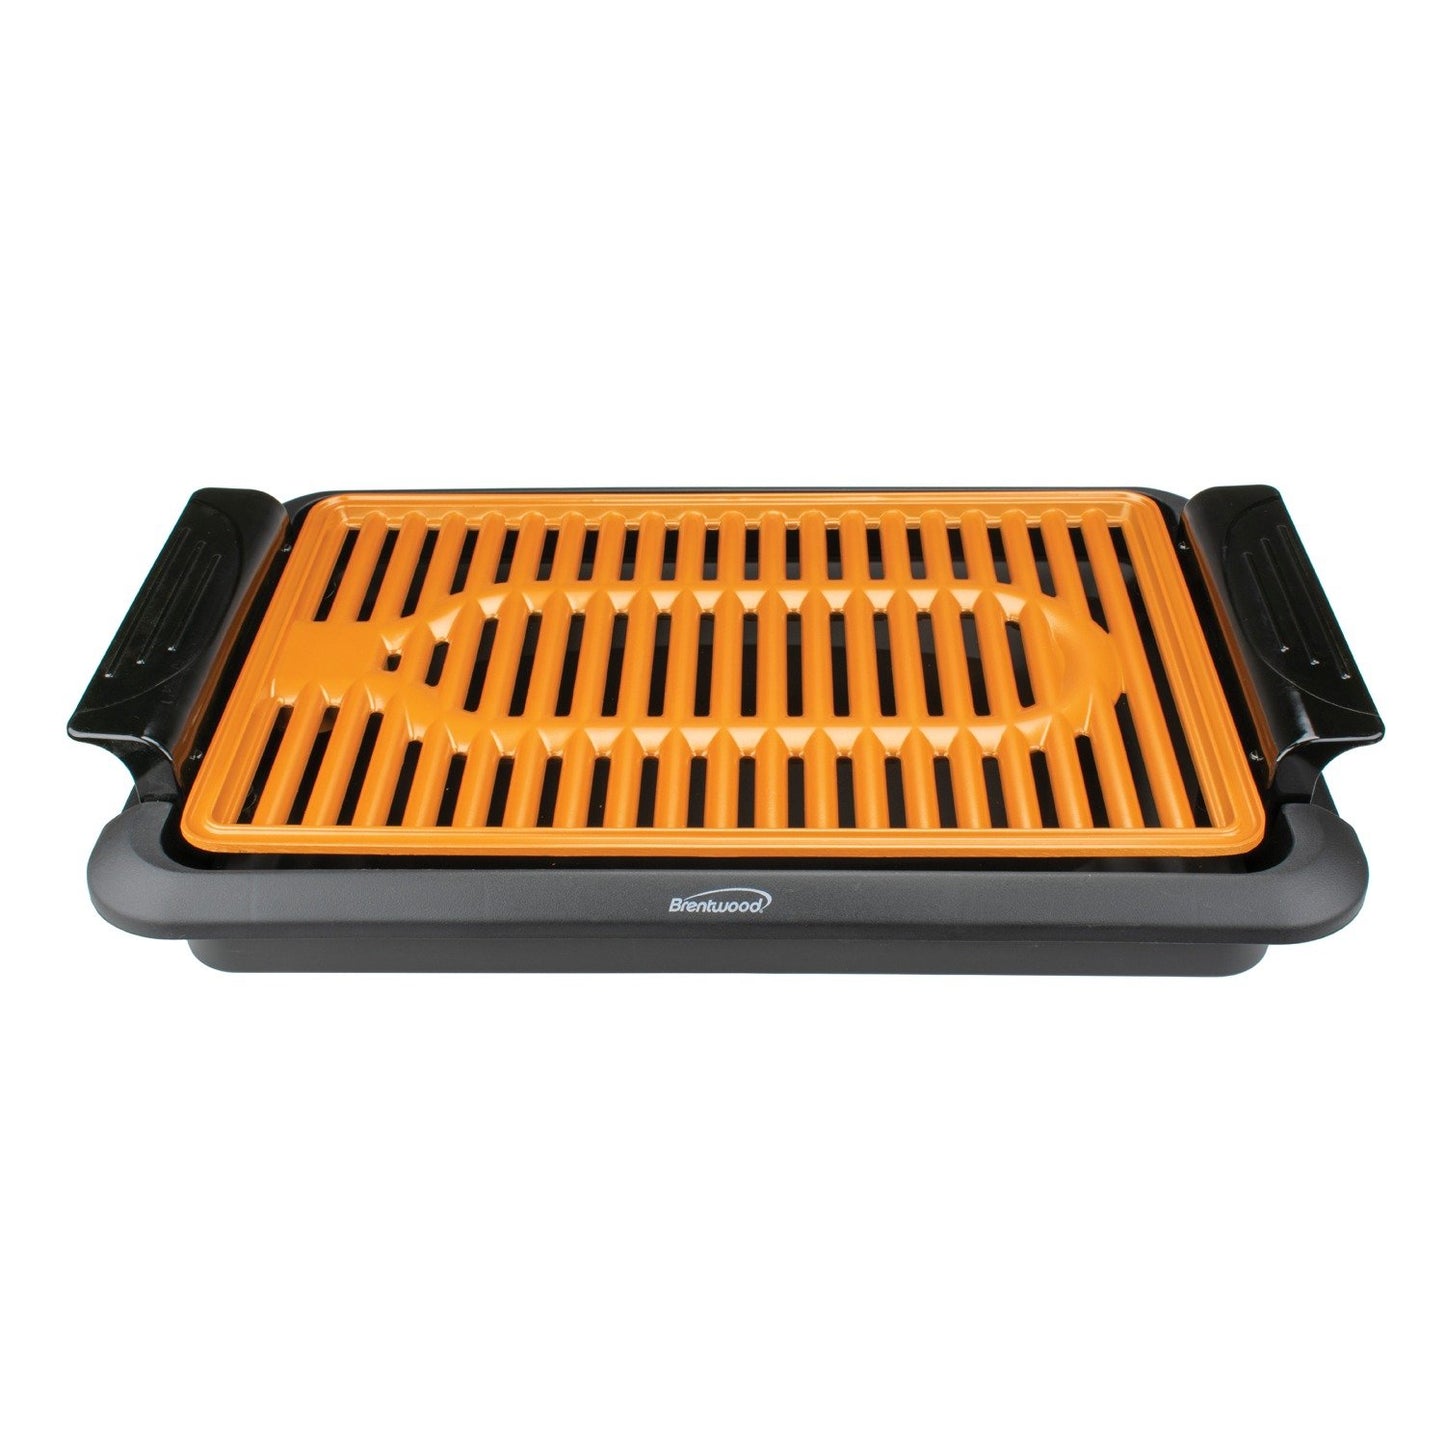 Brentwood Appl. TS-642 1,000W Indoor Electric Copper Grill